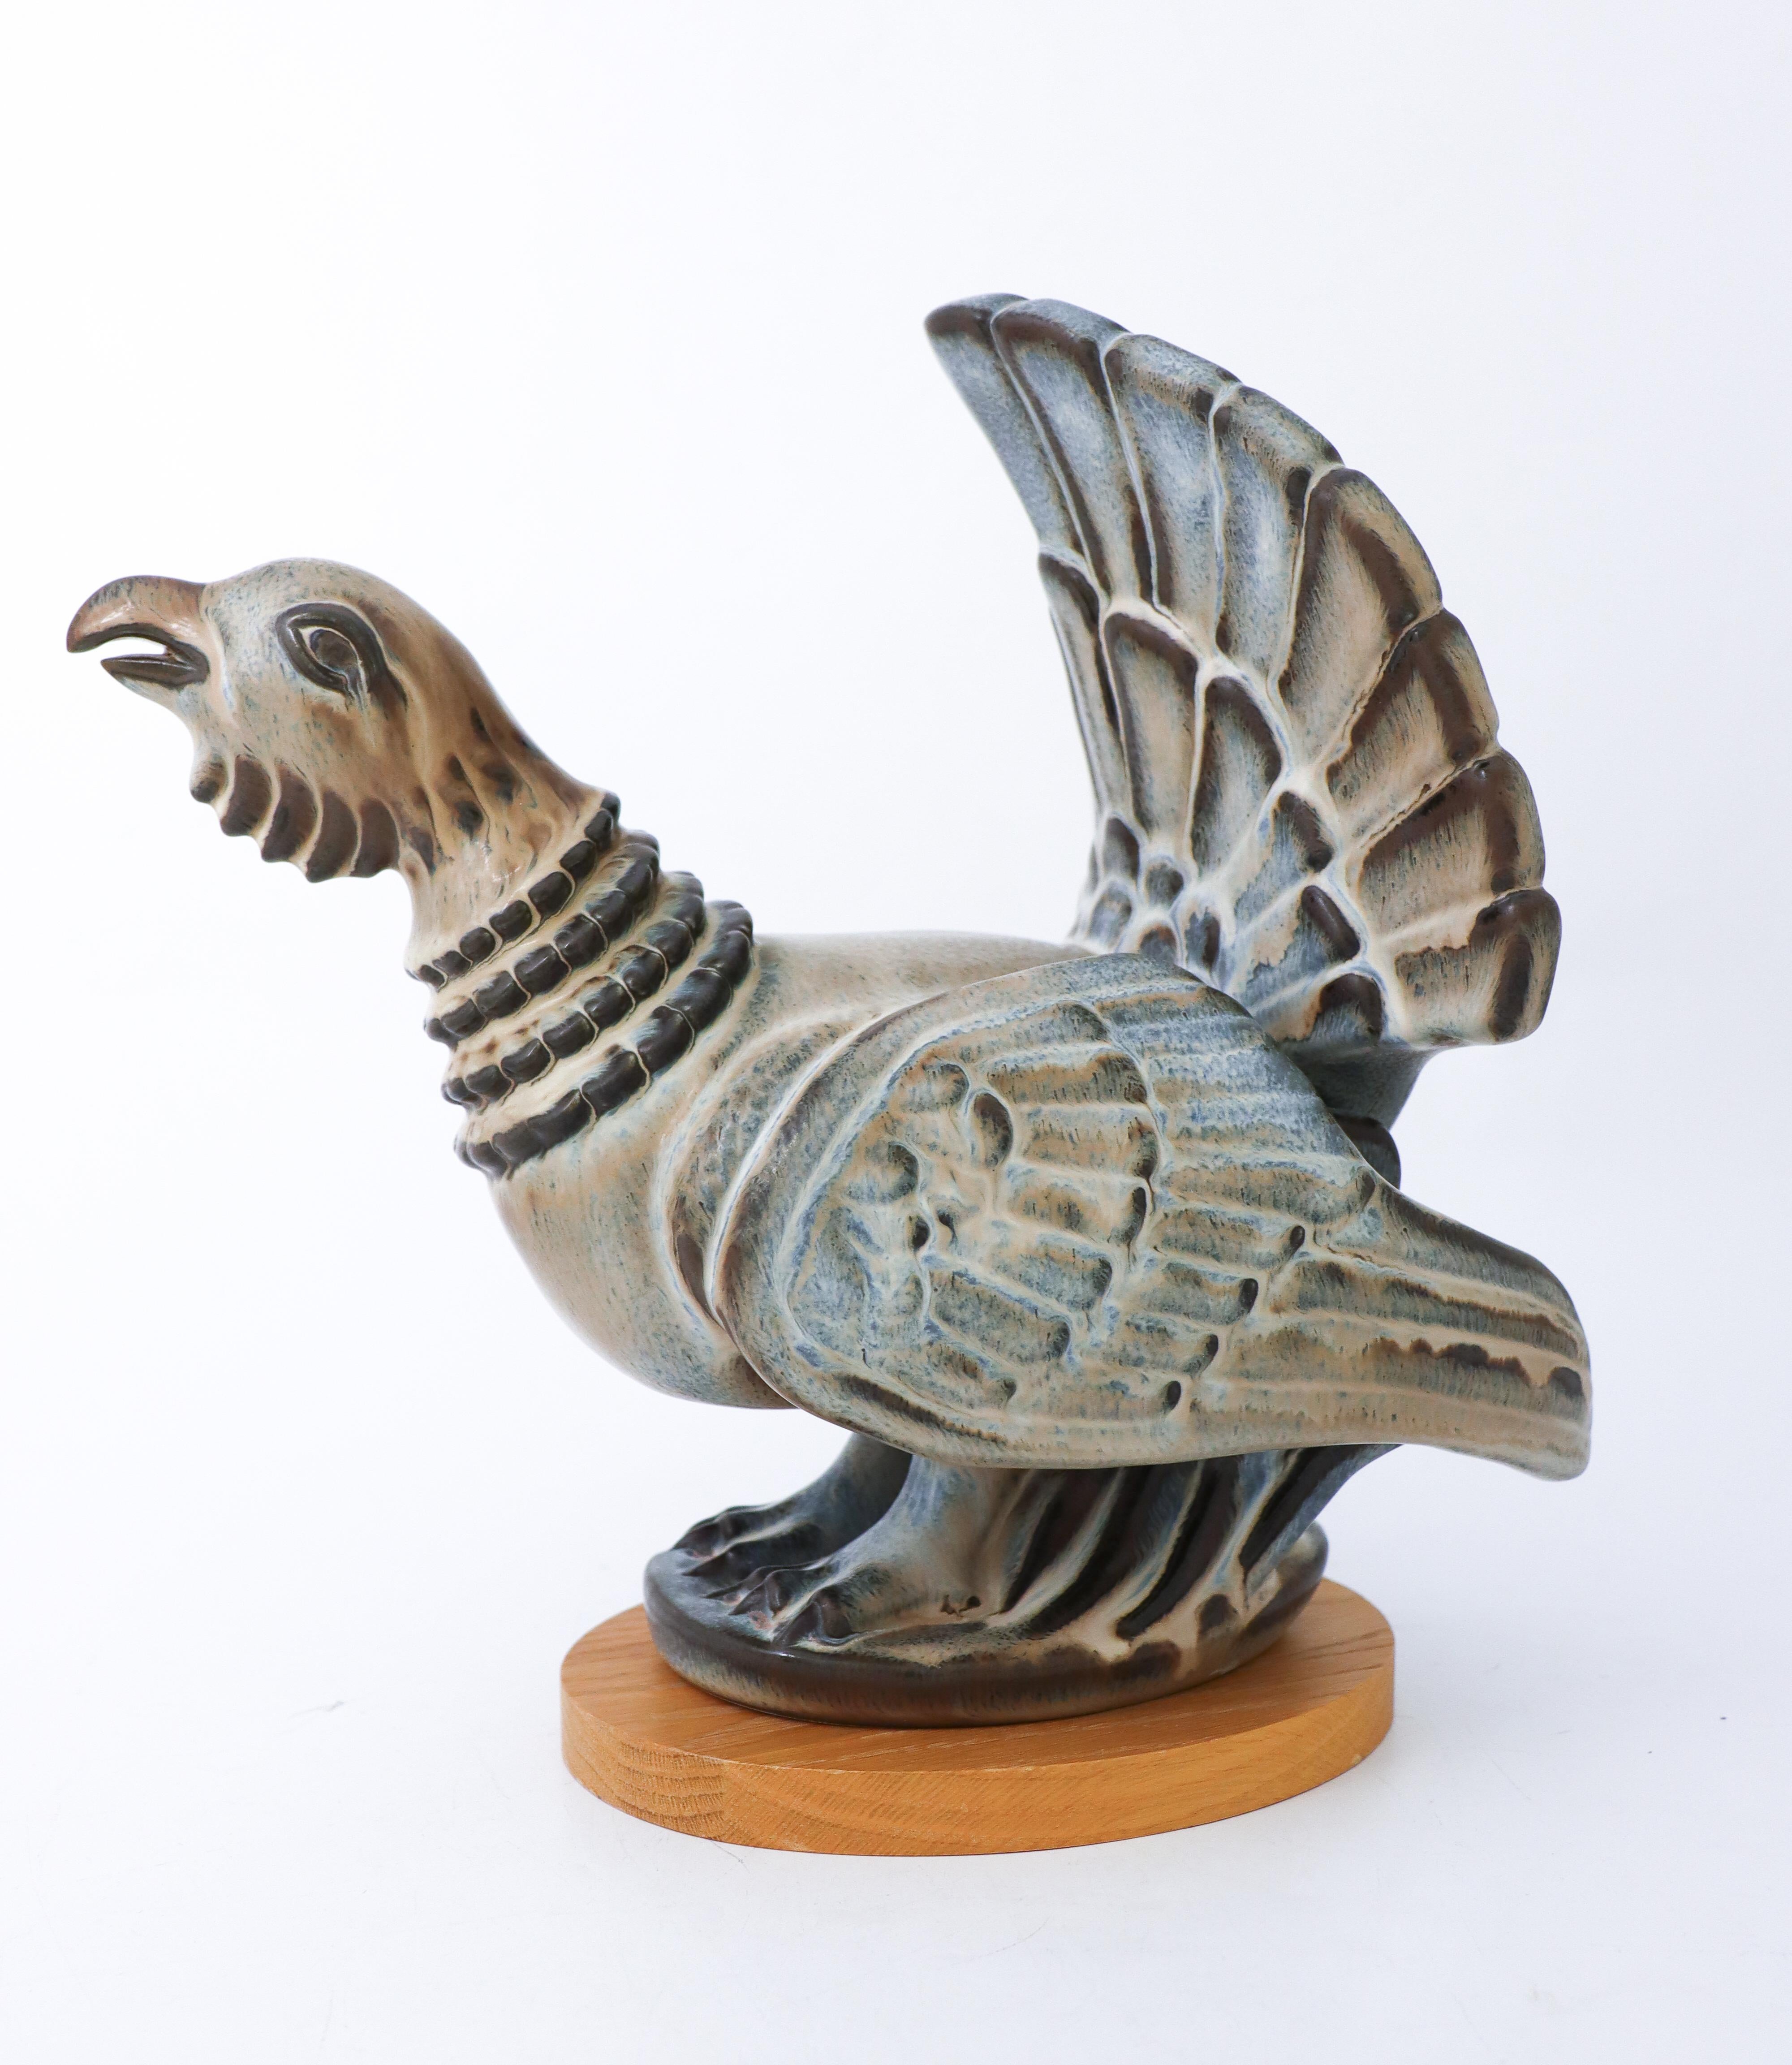 A sculpture of a Capercaillie Bird in ceramic designed by Gunnar Nylund at Rörstrand. It is 32 x 18.5 cm (12.8